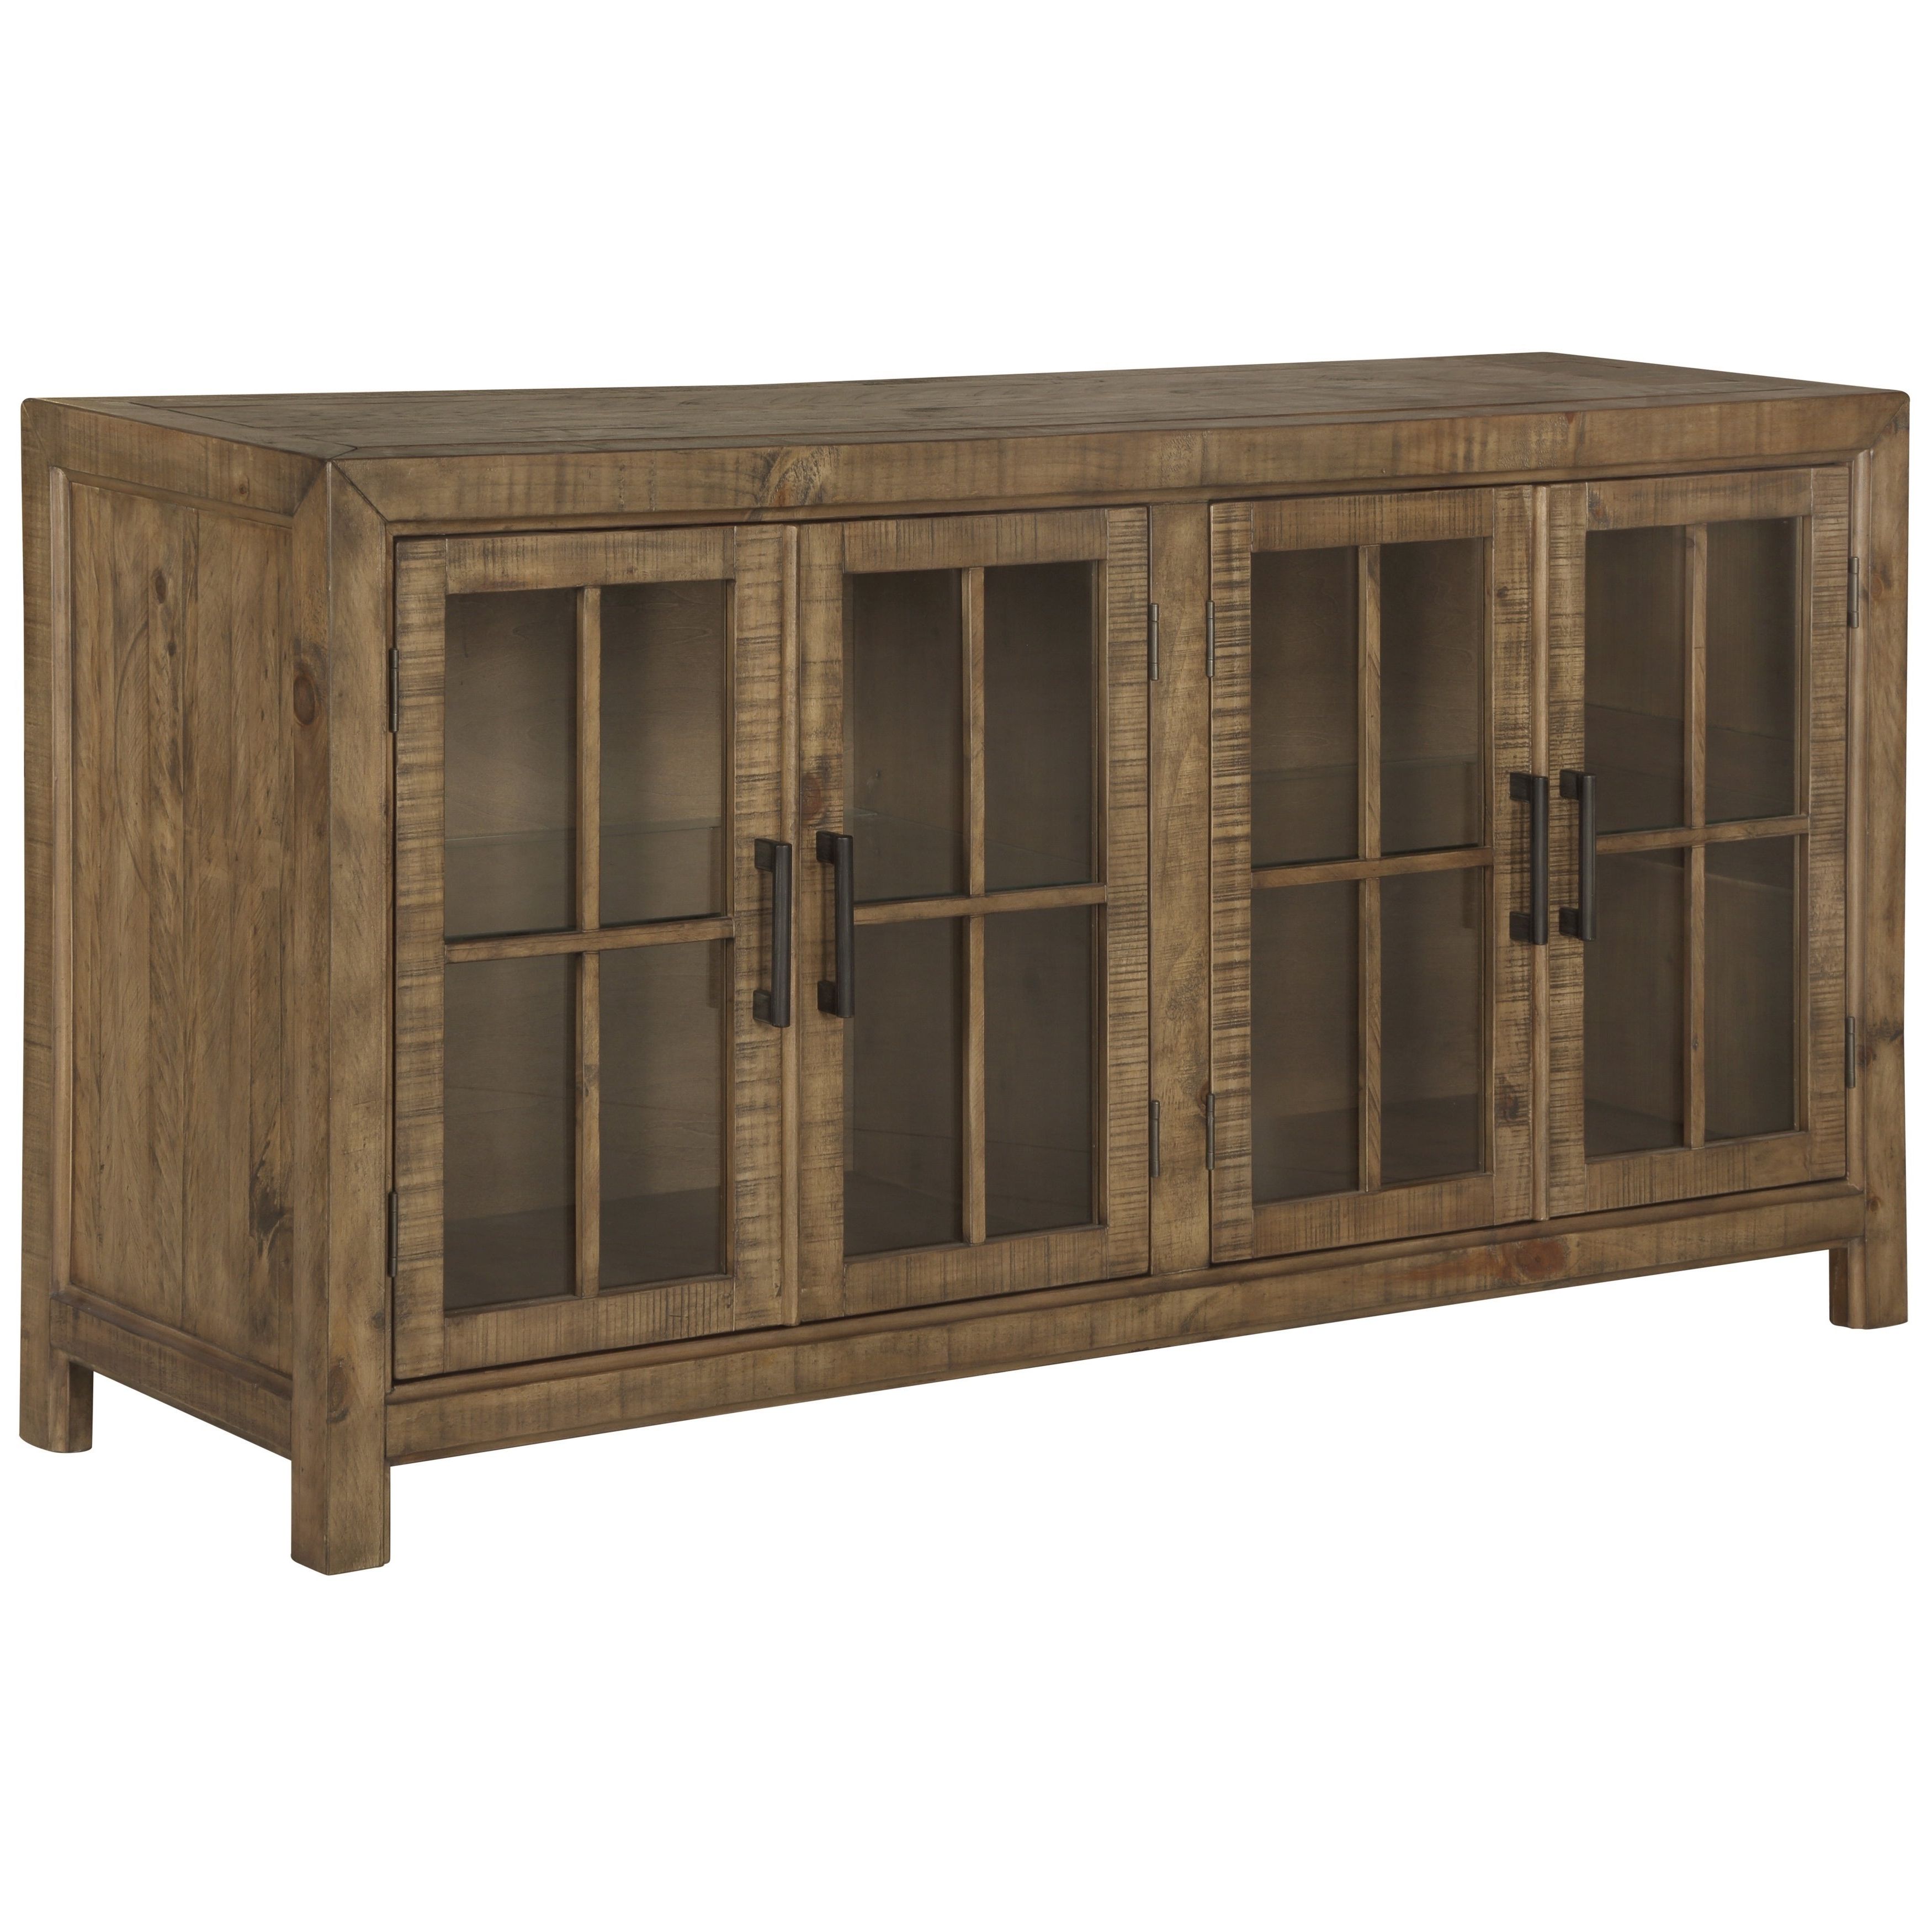 Willoughby Wood Buffet Curio Cabinet In Weathered Barley For Wooden Curio Buffets With Two Glass Doors (View 7 of 20)